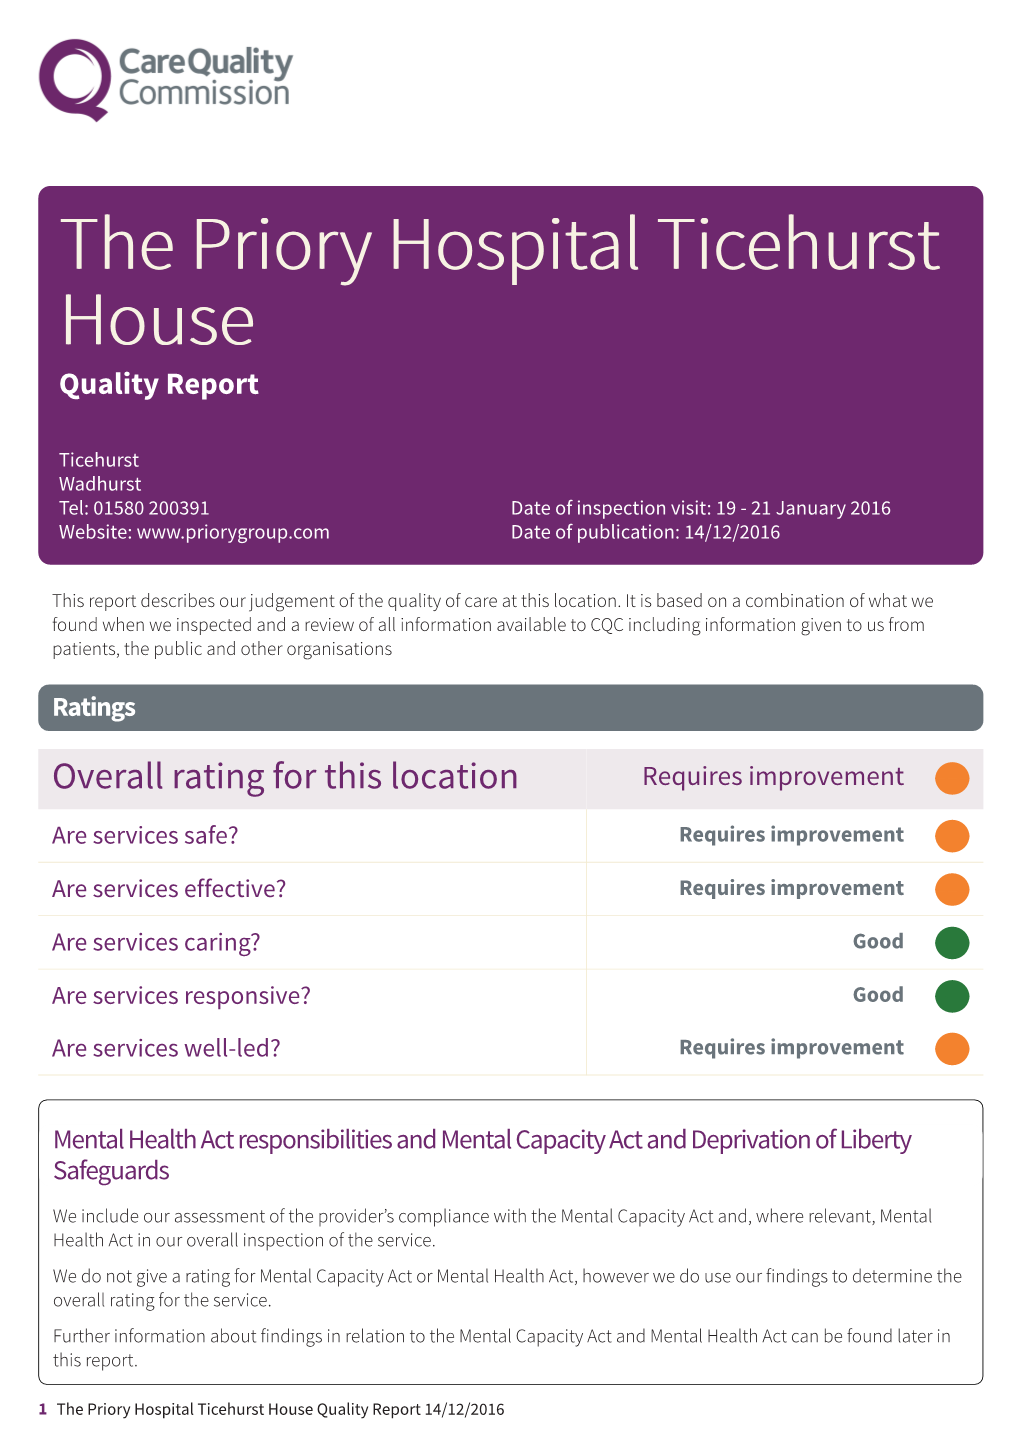 The Priory Hospital Ticehurst House Quality Report